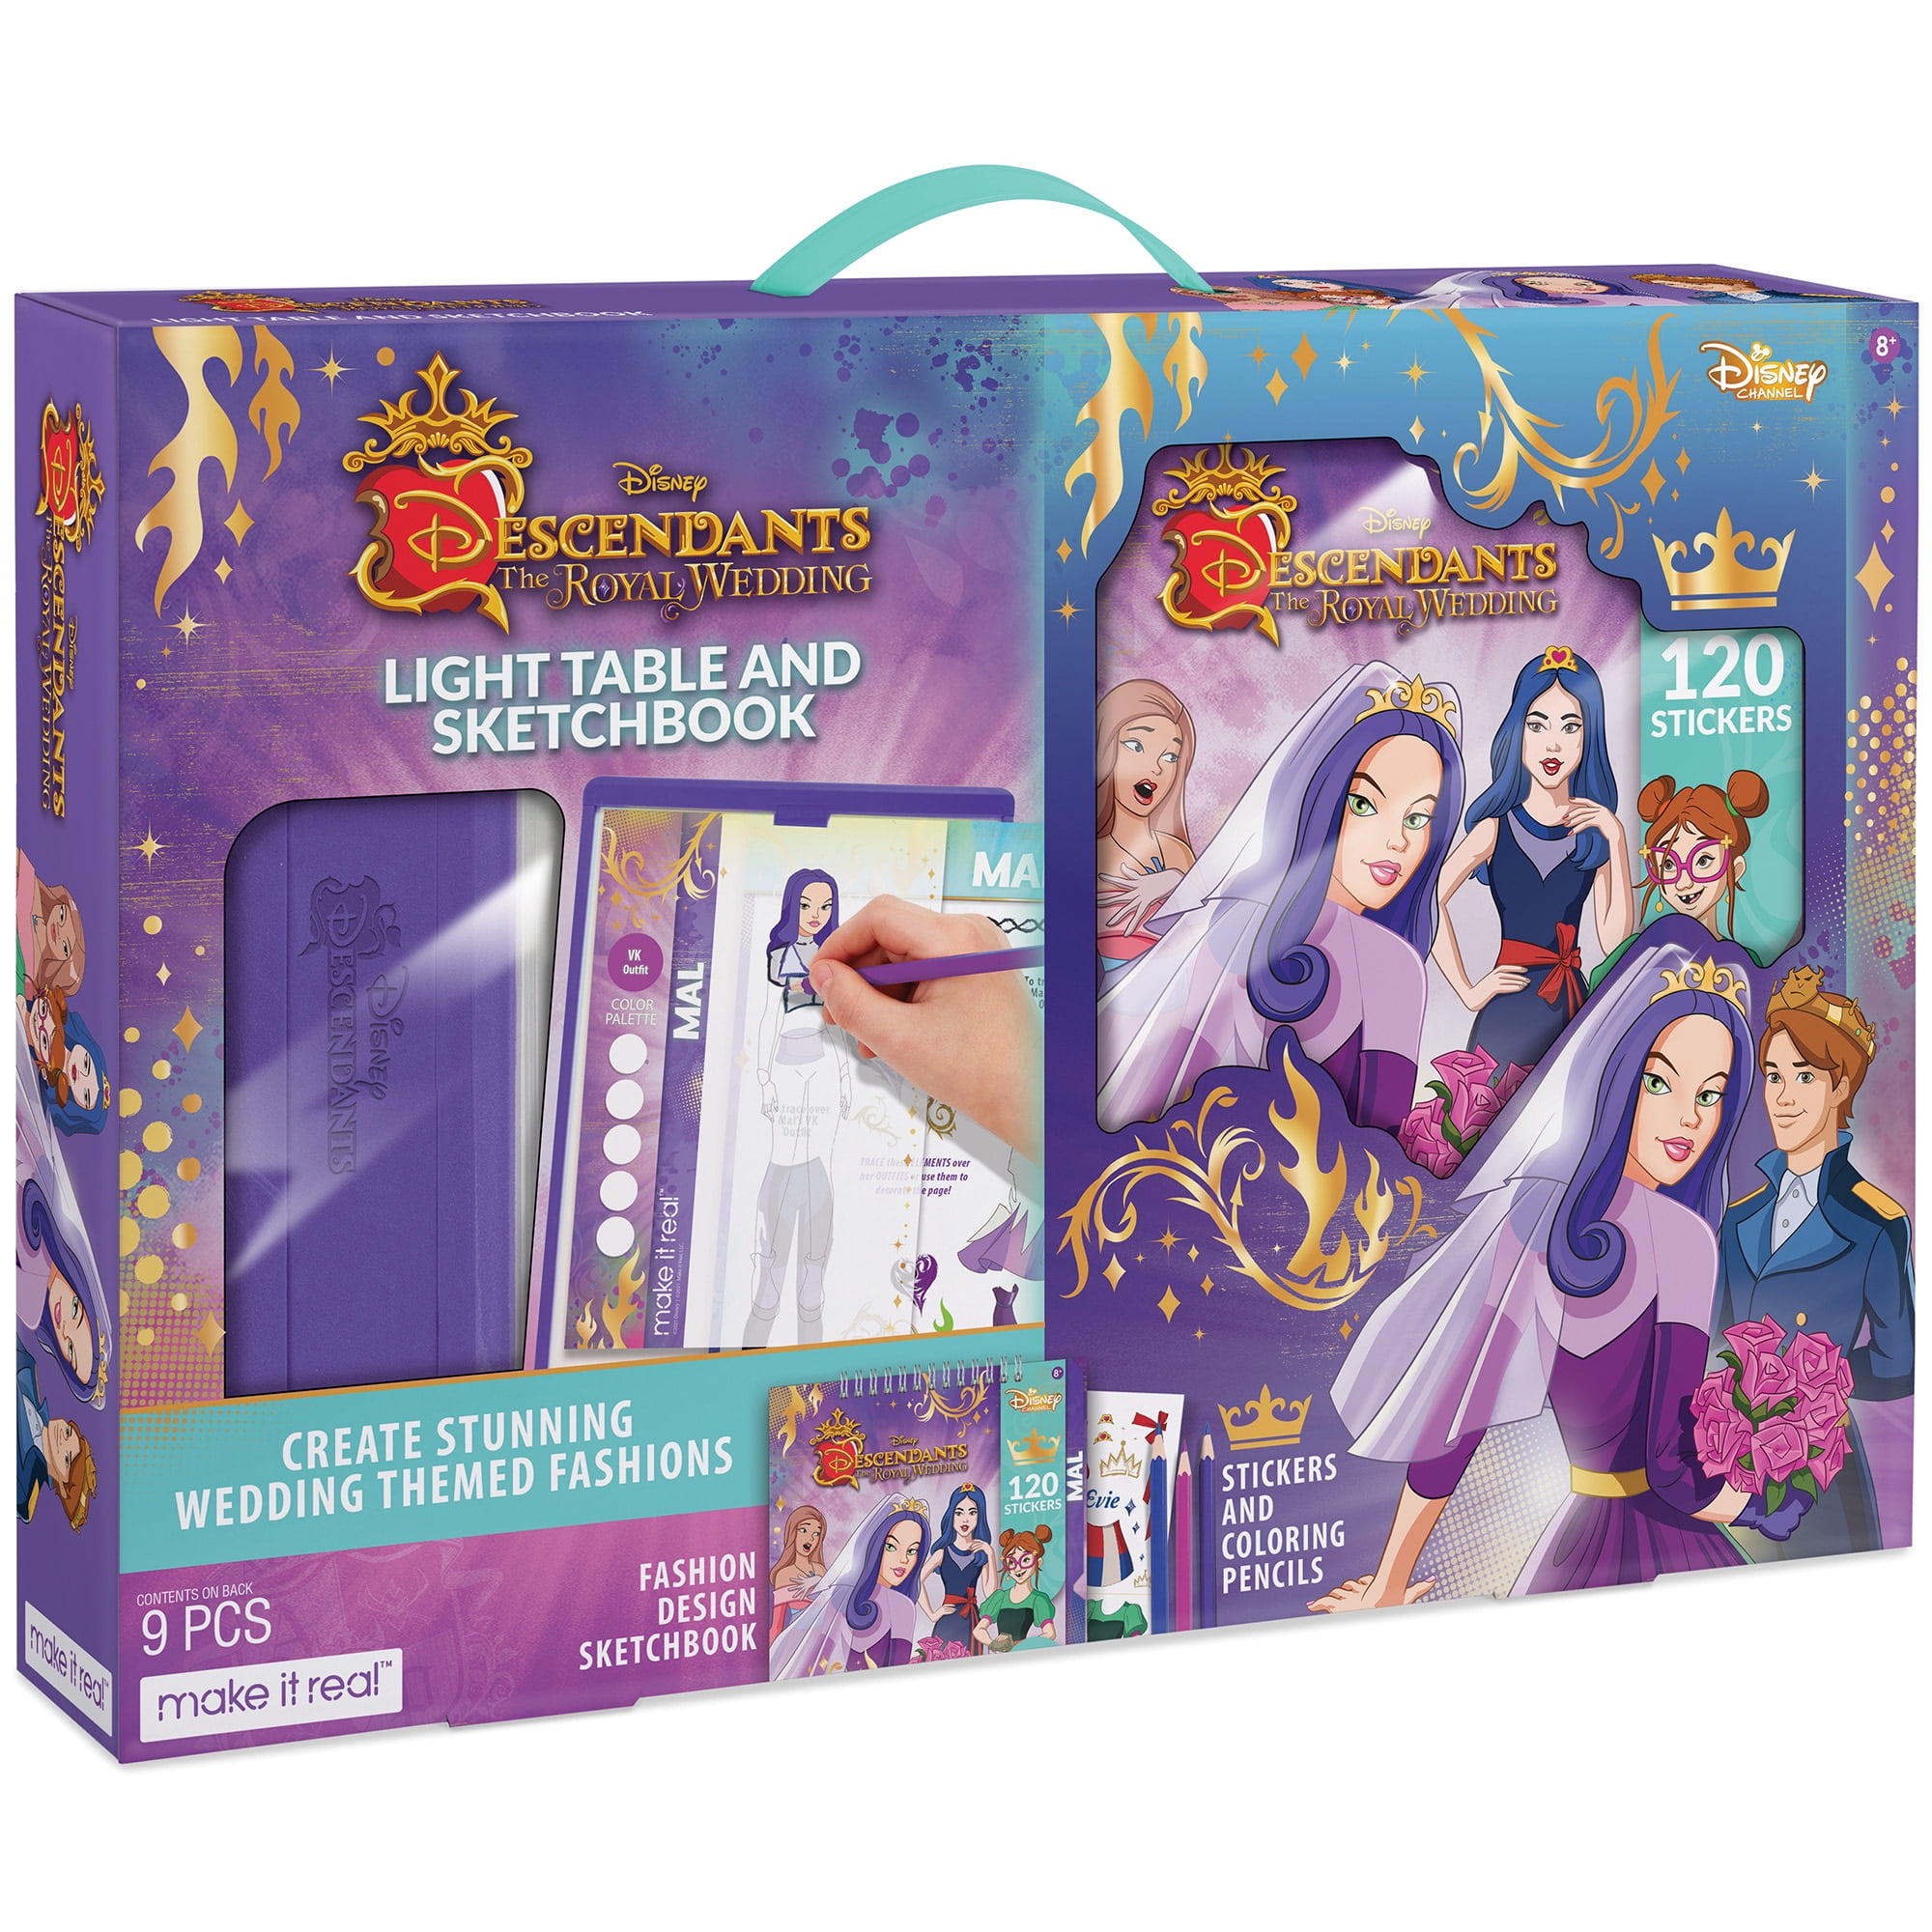 Make It Real - Disney Descendants 3 Sketchbook with Tracing Light Table.  Fashion Design Tracing and Drawing Kit for Girls. Includes Sketch Pages,  Stencils, Stickers, and Backlit Tracing Pad